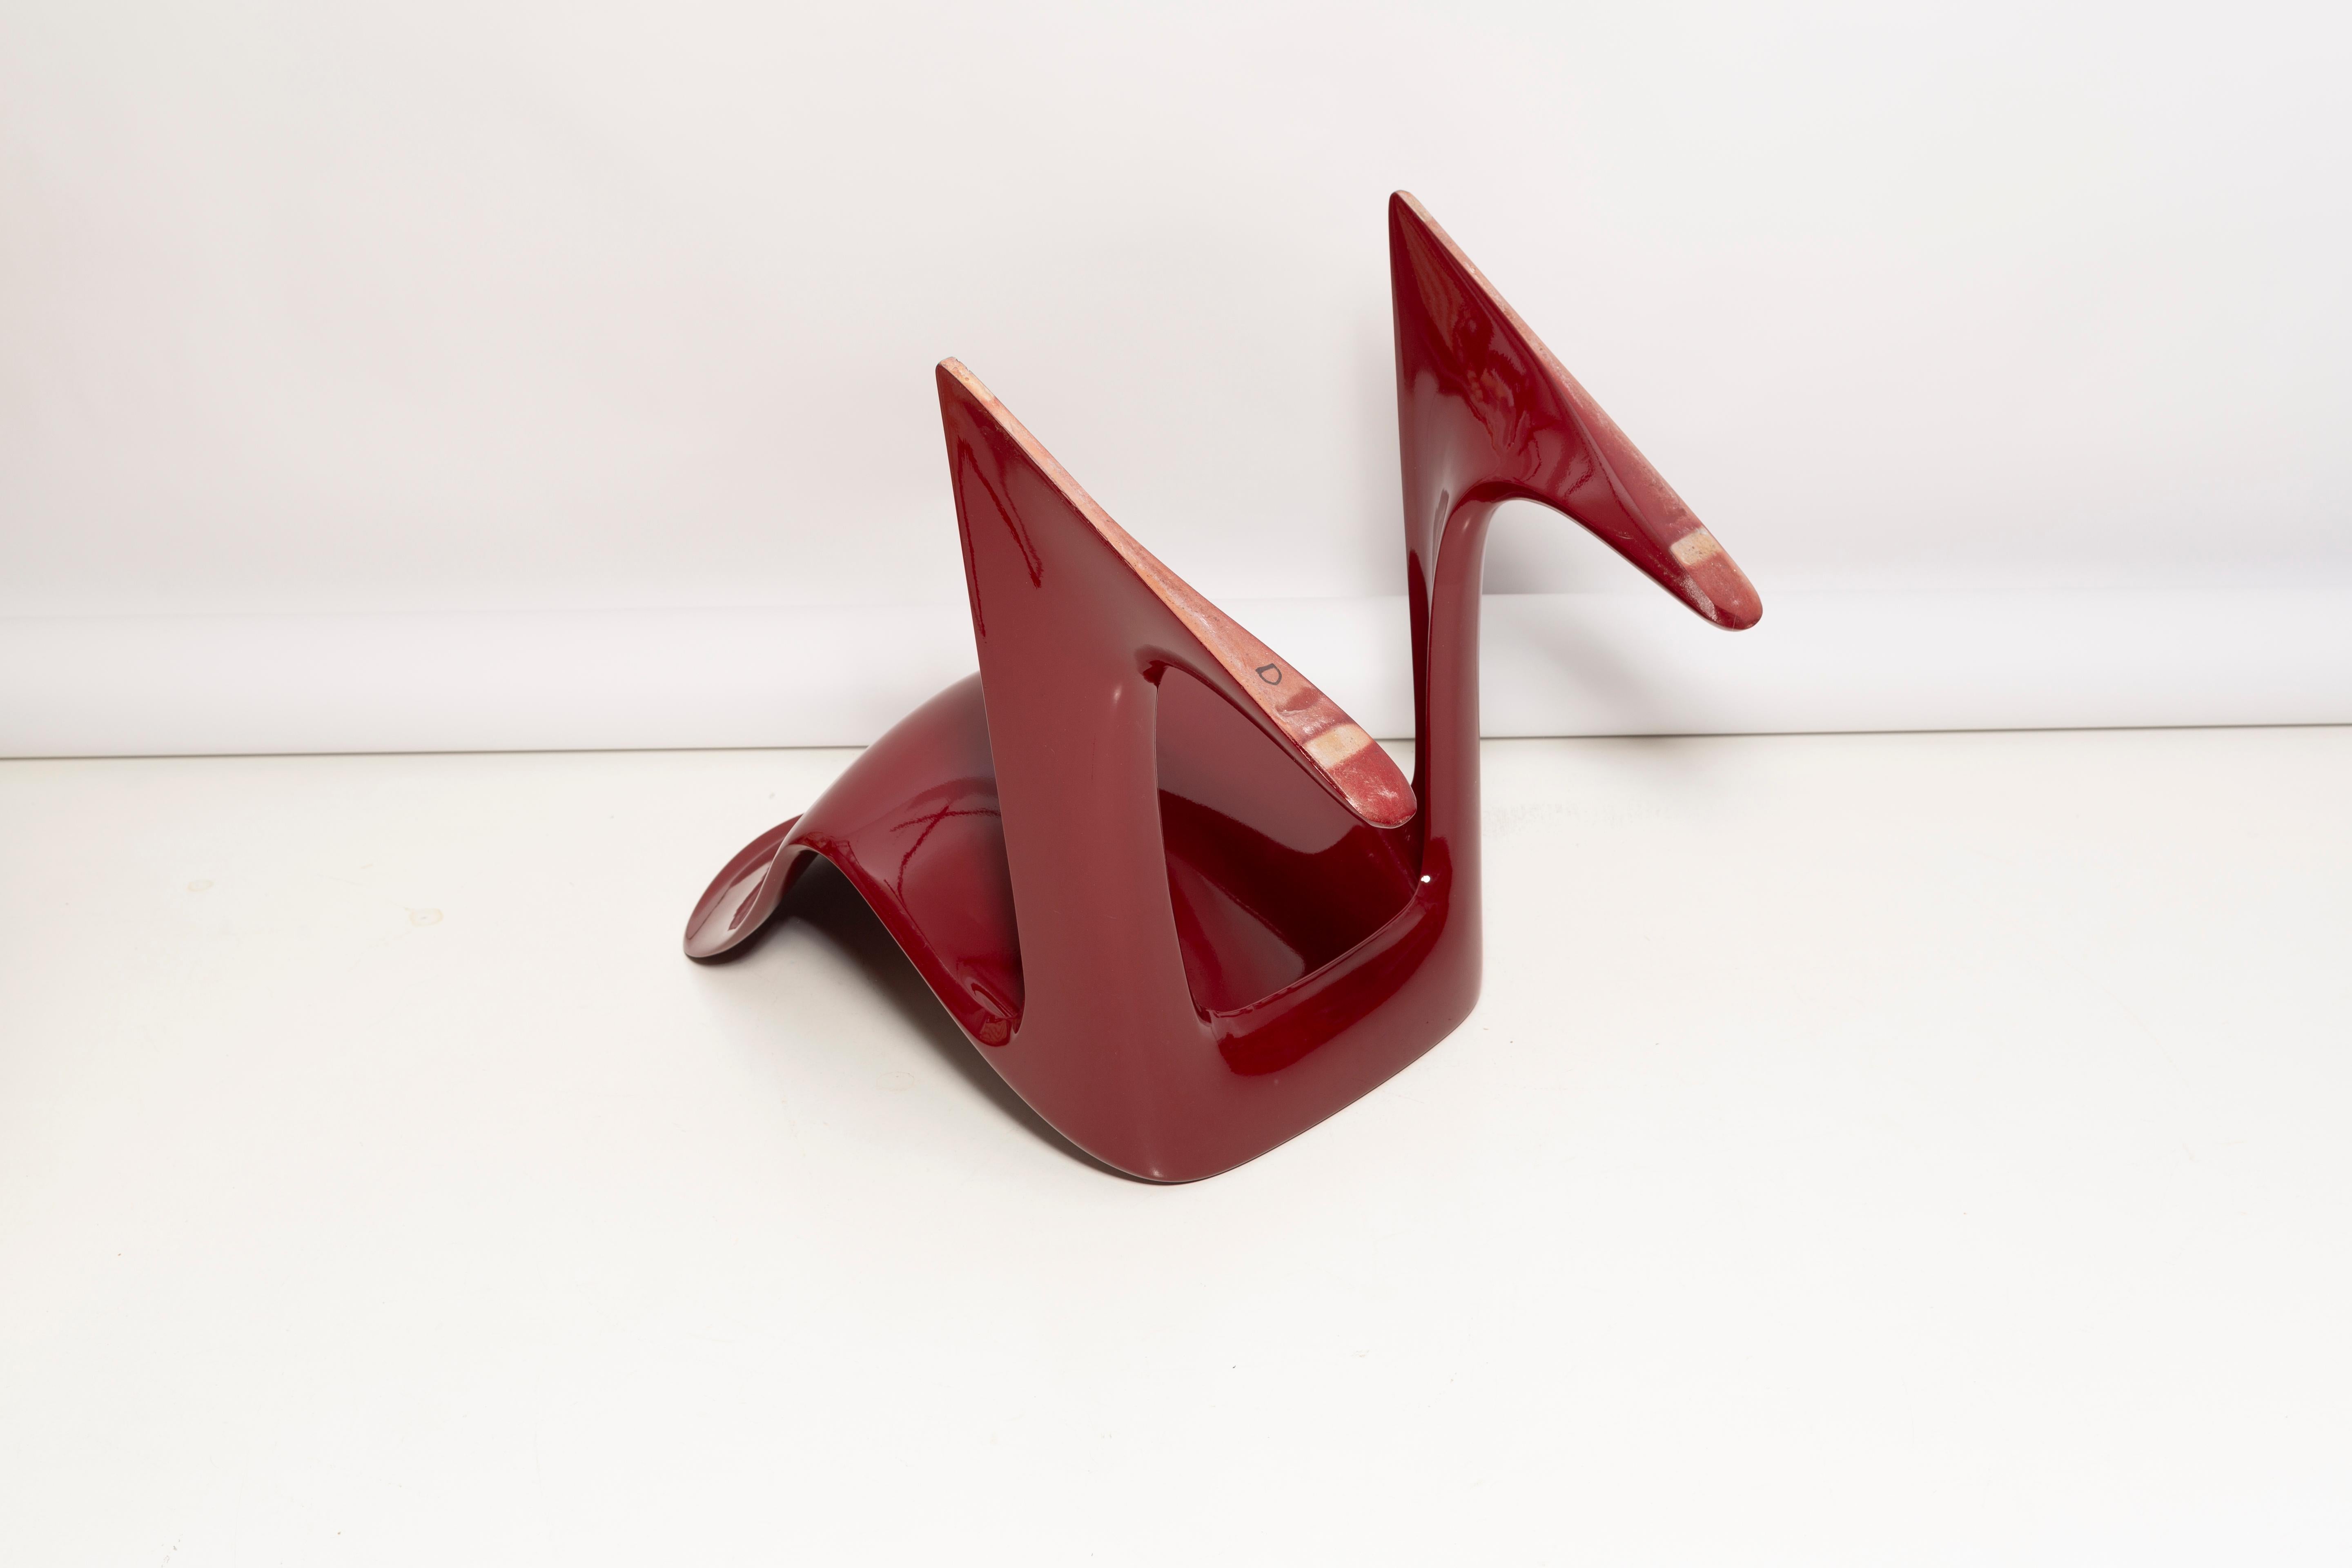 Pair of Dark Red Wine Kangaroo Chairs Designed by Ernst Moeckl, Germany, 1968 For Sale 1